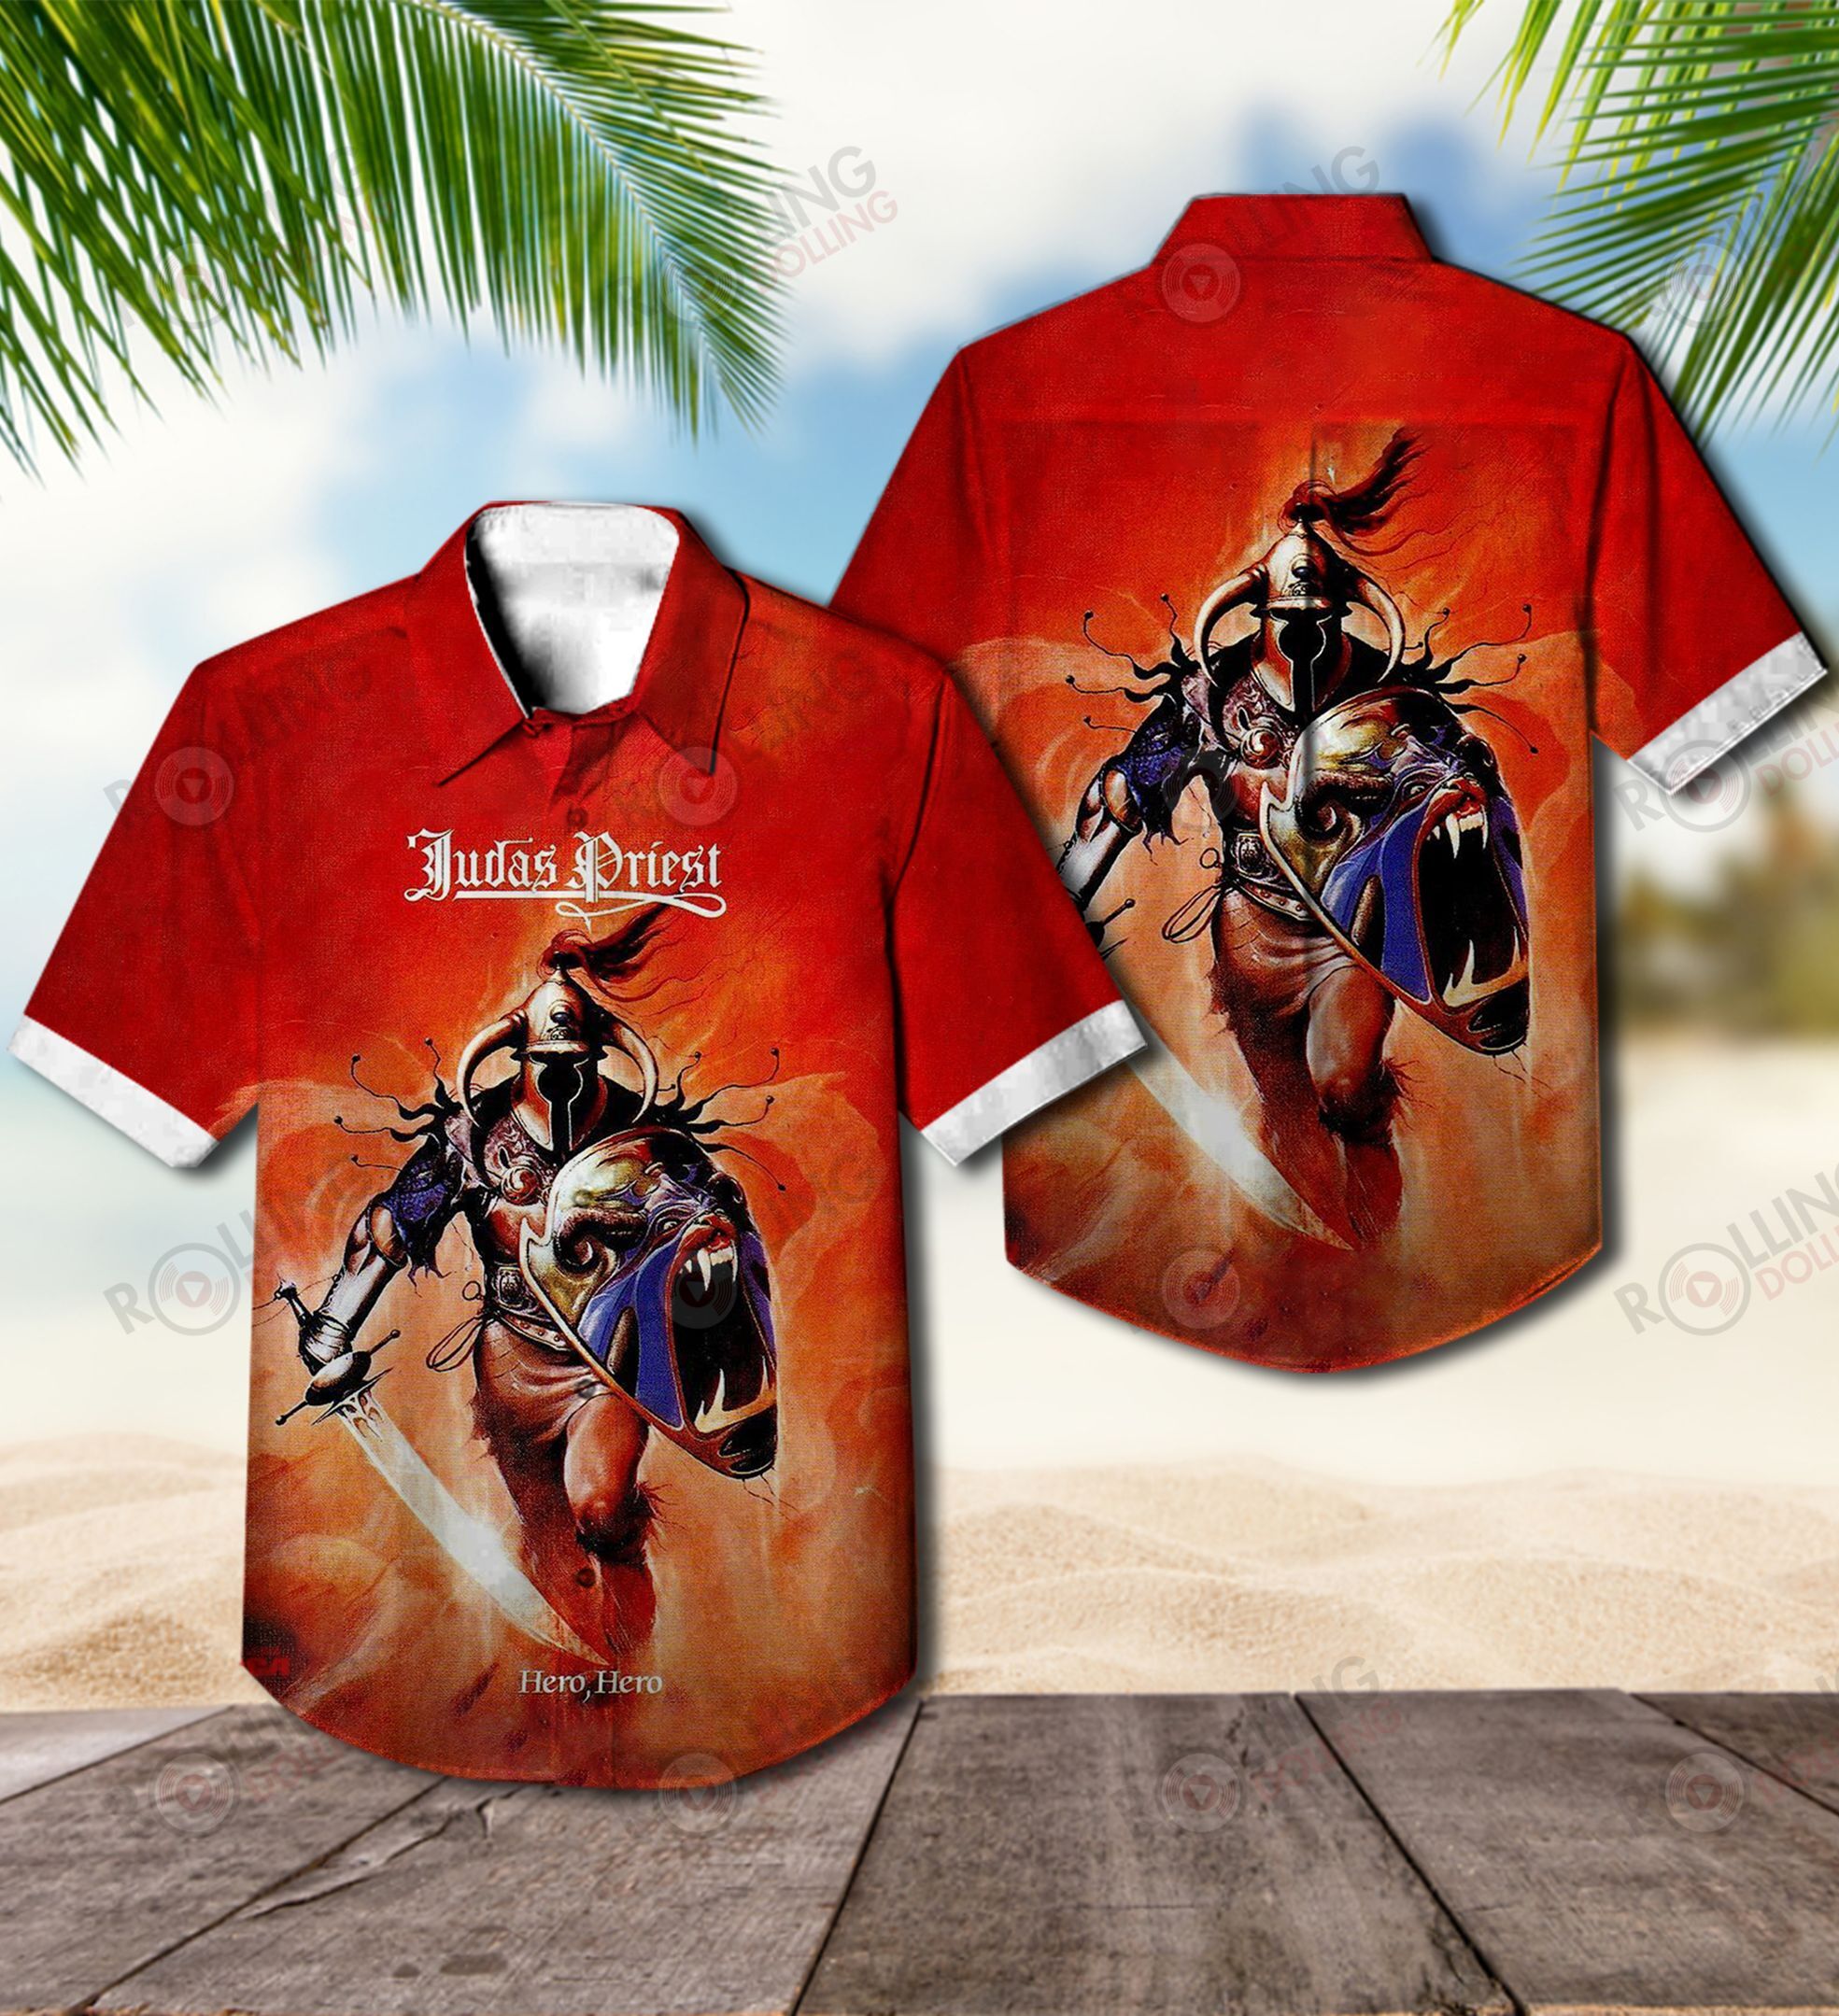 Check out these top 100+ Hawaiian shirt so cool for rock fans 259